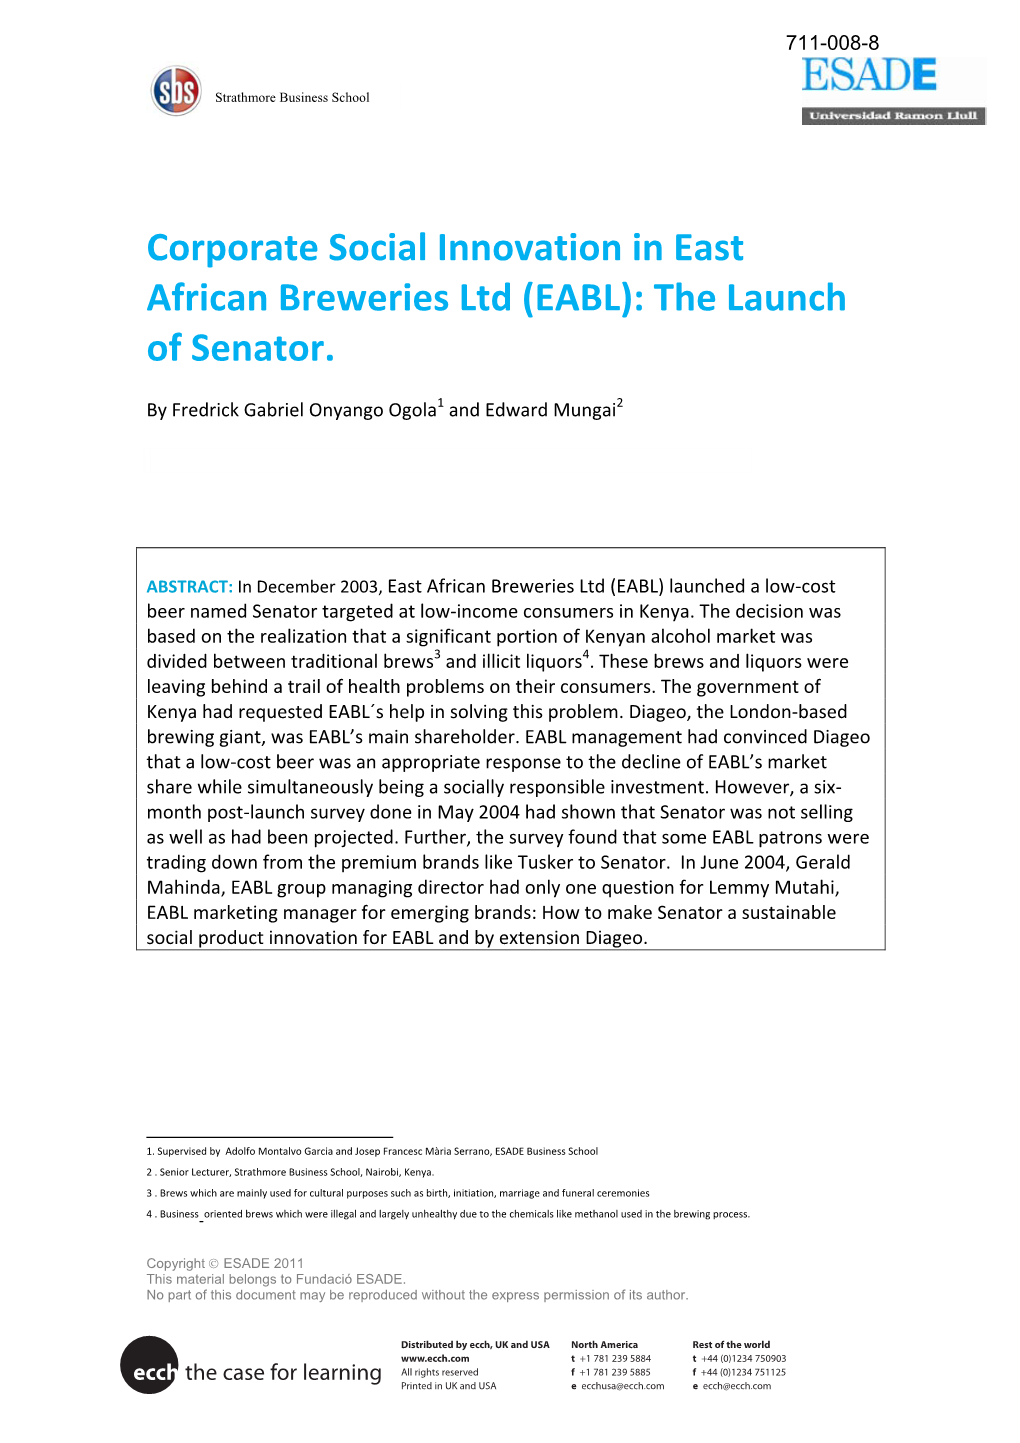 Corporate Social Innovation in East African Breweries Ltd (EABL): the Launch of Senator